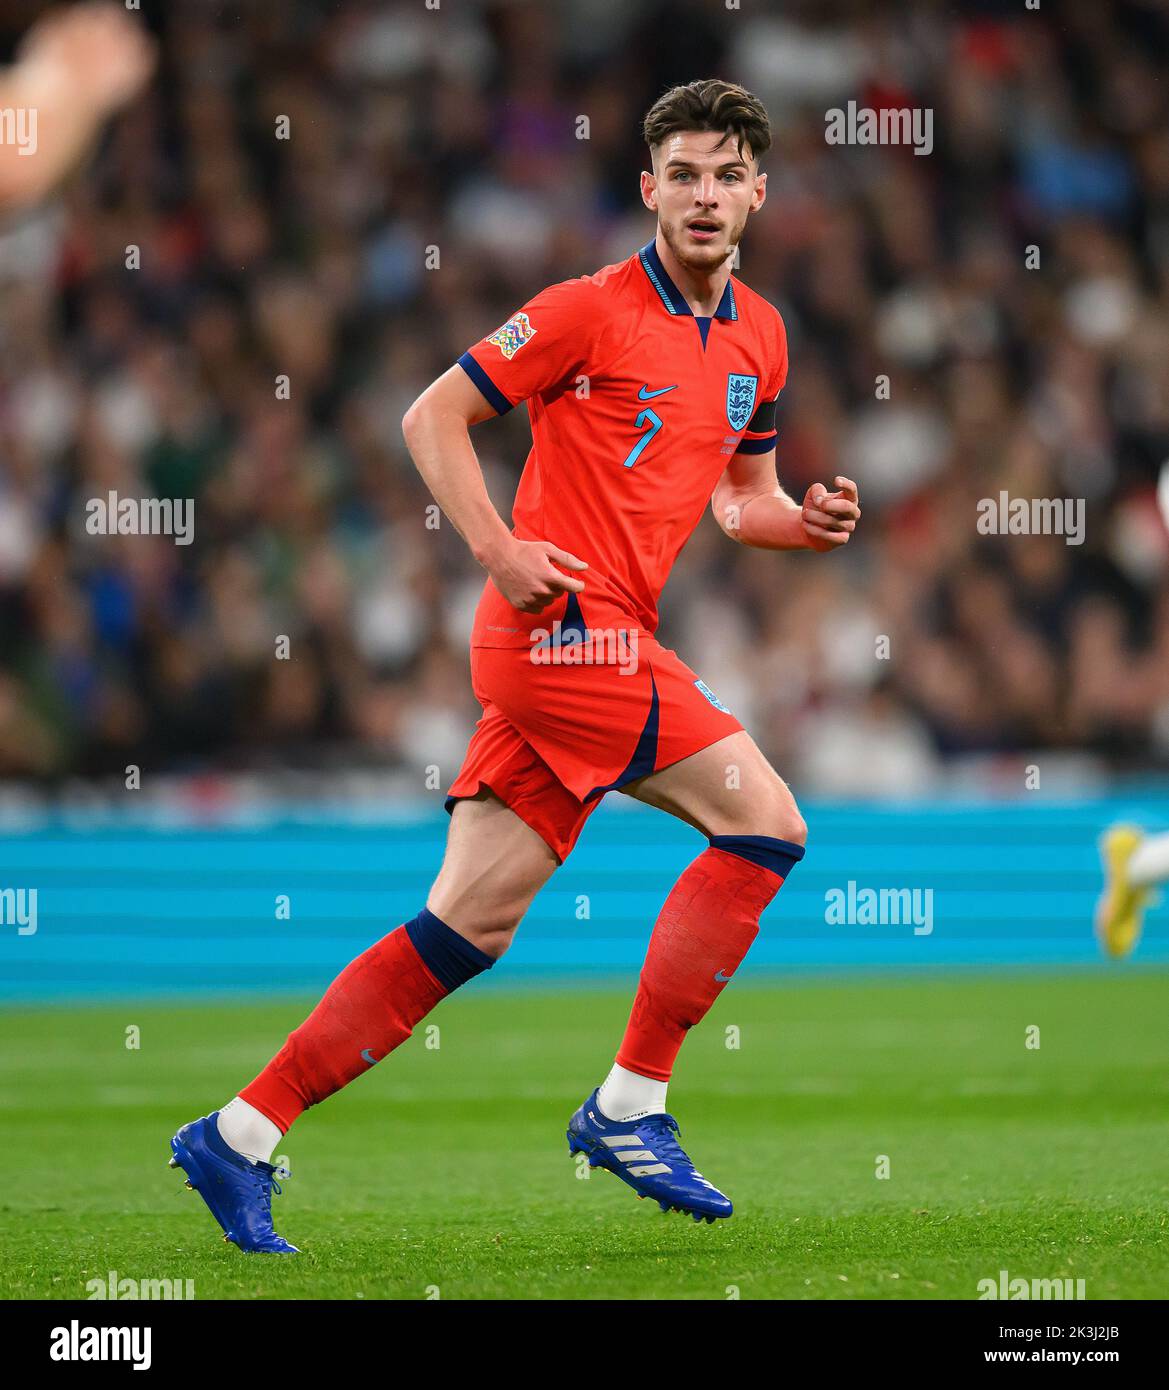 London, UK. 26 Sep 2022 - England v Germany - UEFA Nations League - League A - Group 3 - Wembley Stadium  England's Declan Rice during the UEFA Nations League match against Germany. Picture : Mark Pain / Alamy Live News Stock Photo